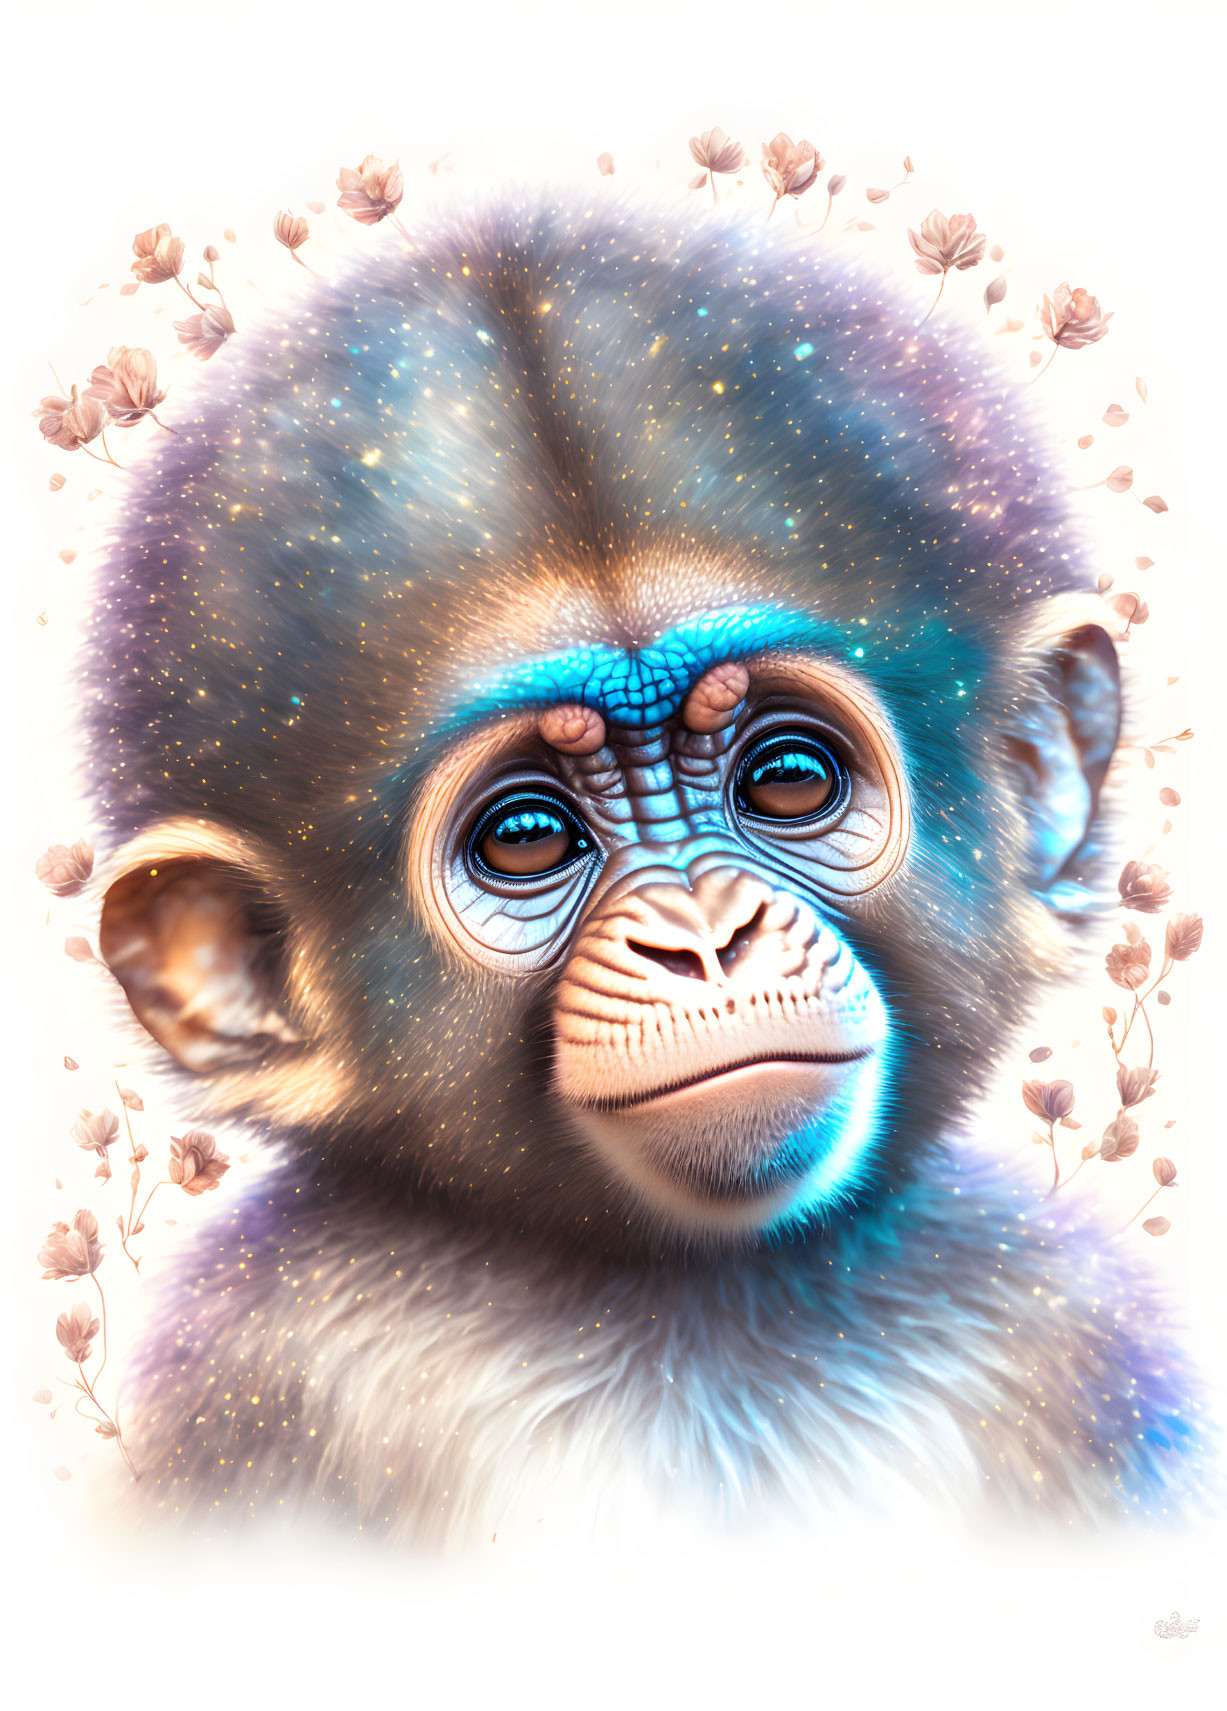 Baby Gorilla Illustration with Sparkling Eyes and Vibrant Flowers